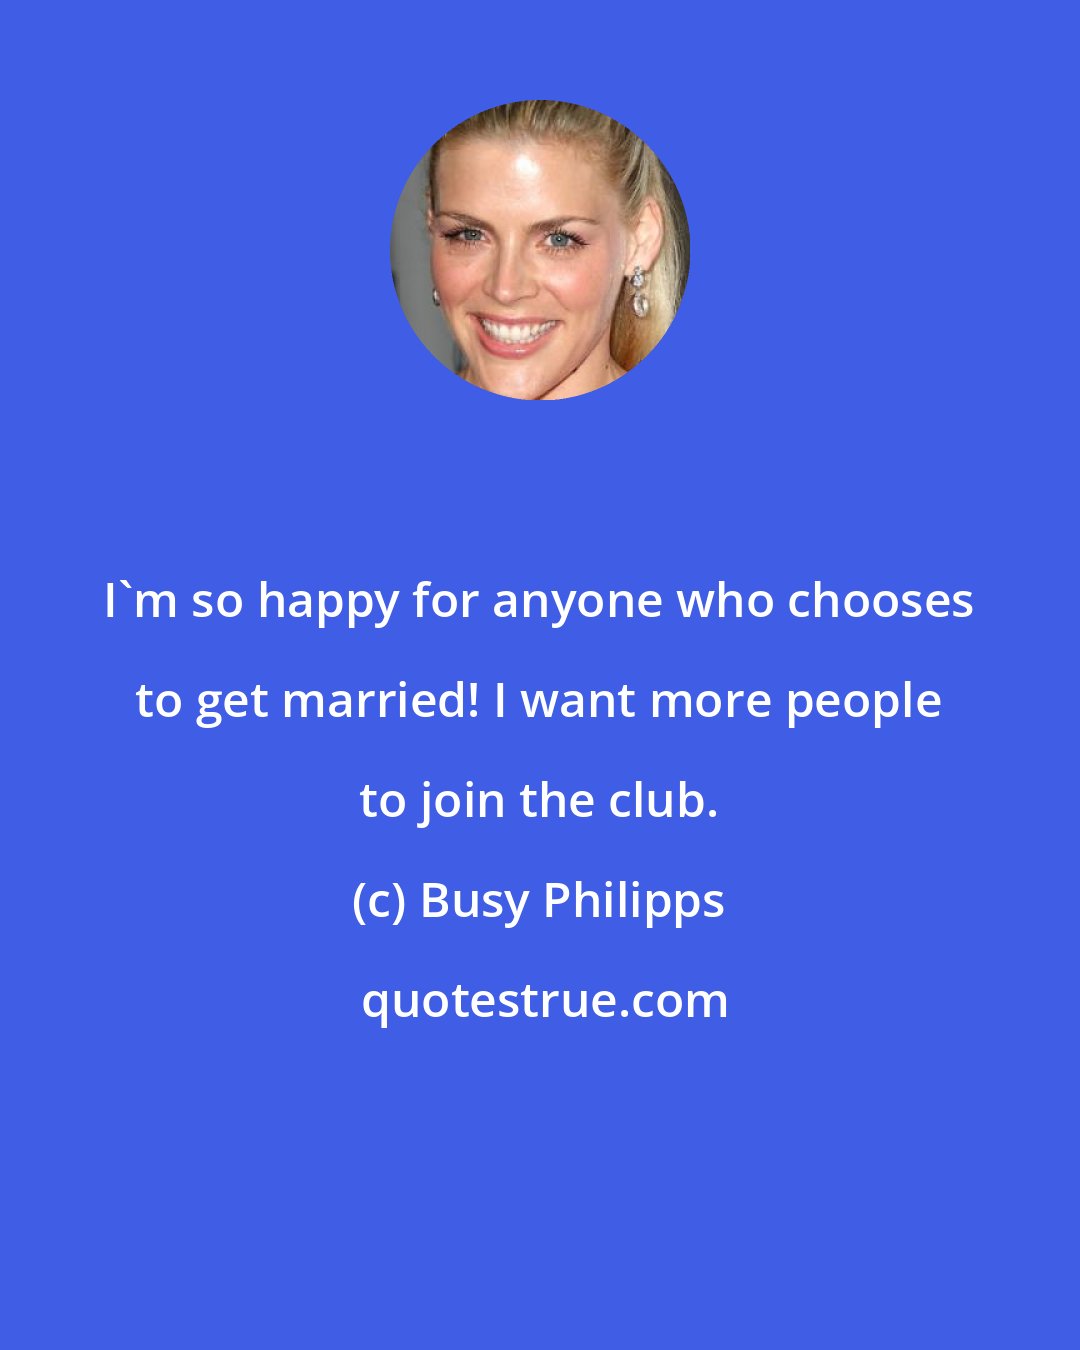 Busy Philipps: I'm so happy for anyone who chooses to get married! I want more people to join the club.